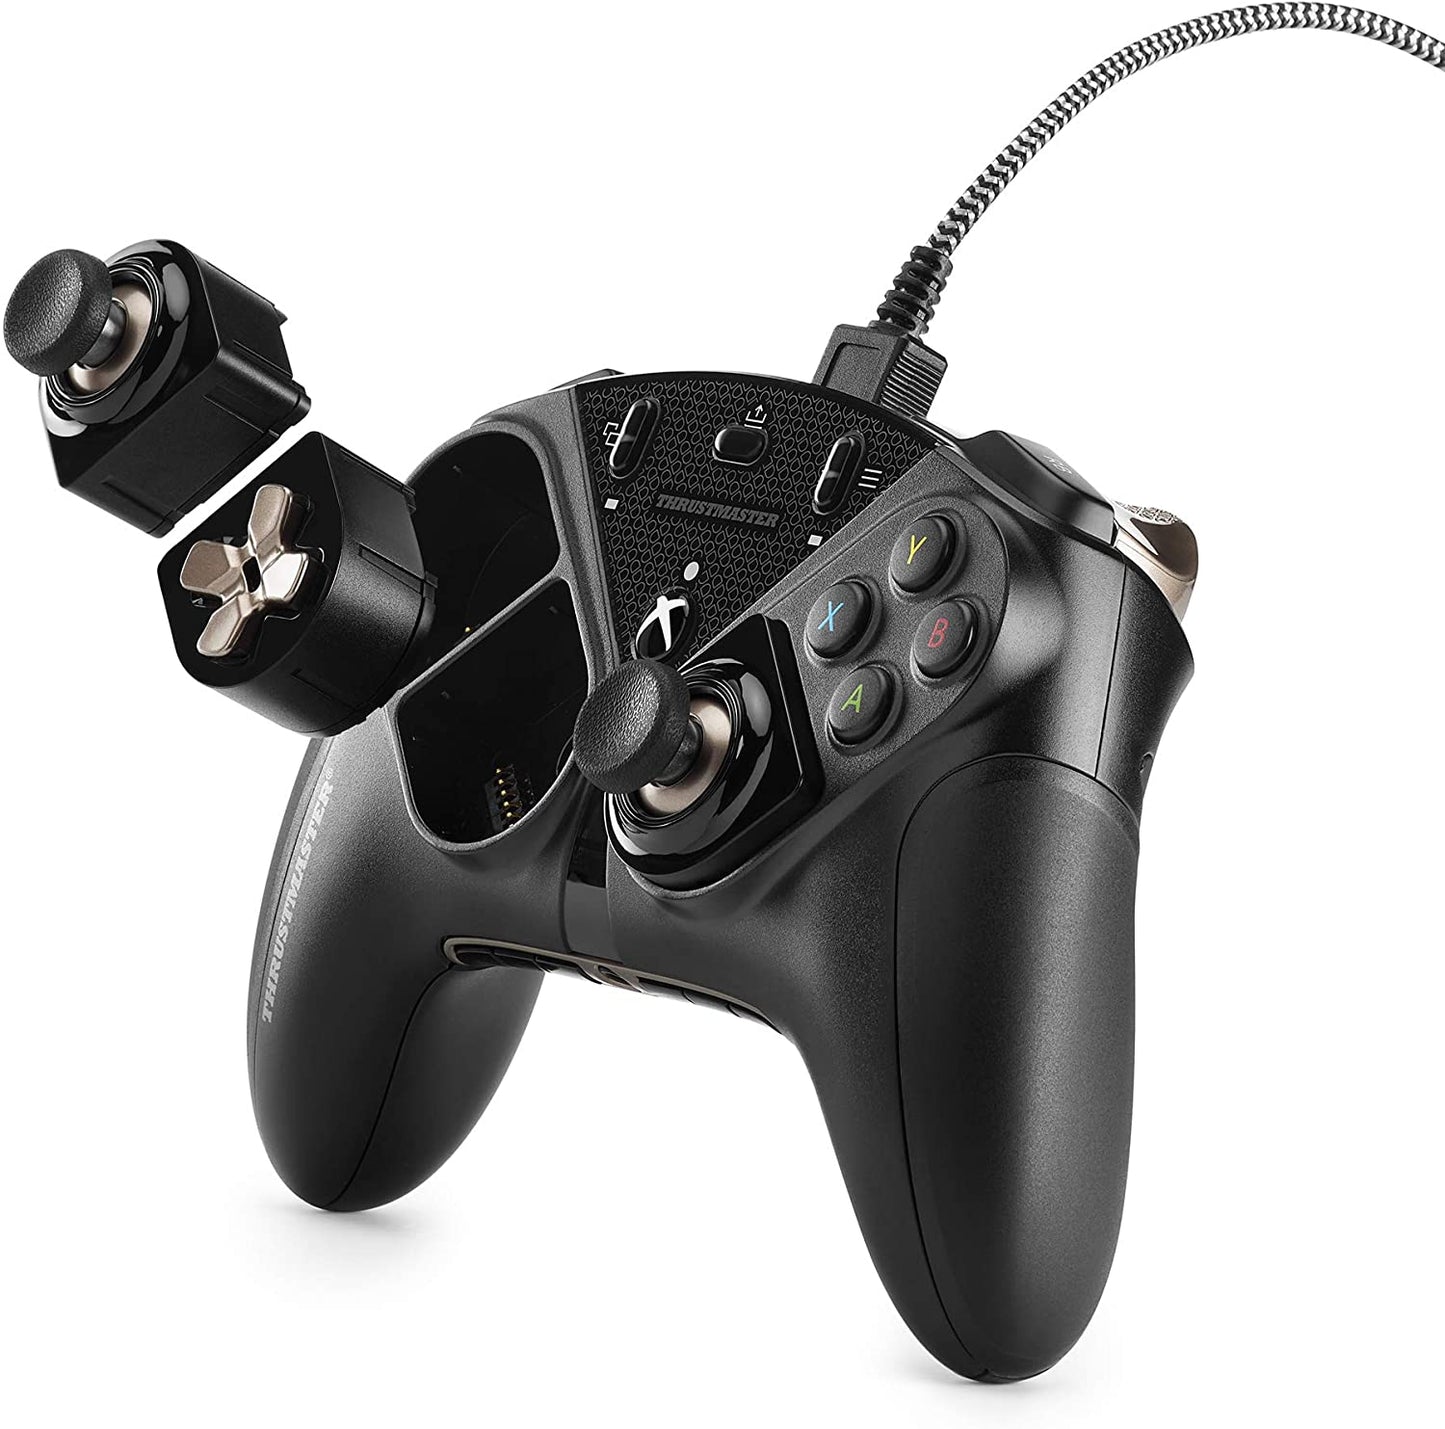 Thrustmaster eSwap X Pro Wired Controller for Xbox Series X|S / Xbox One / PC - Refurbished